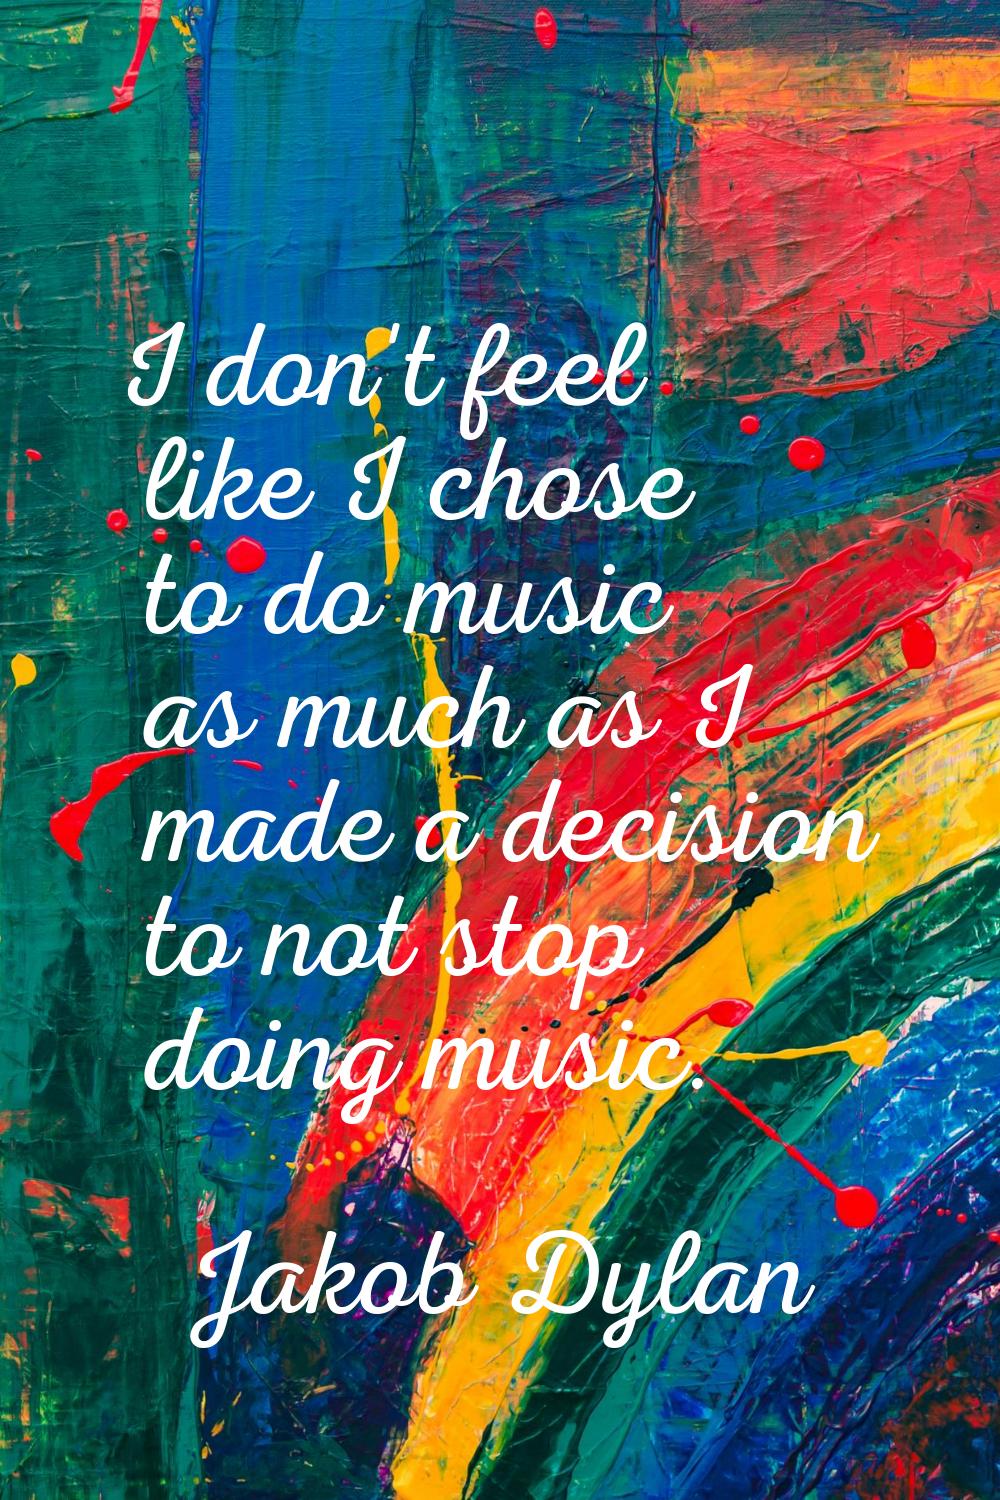 I don't feel like I chose to do music as much as I made a decision to not stop doing music.